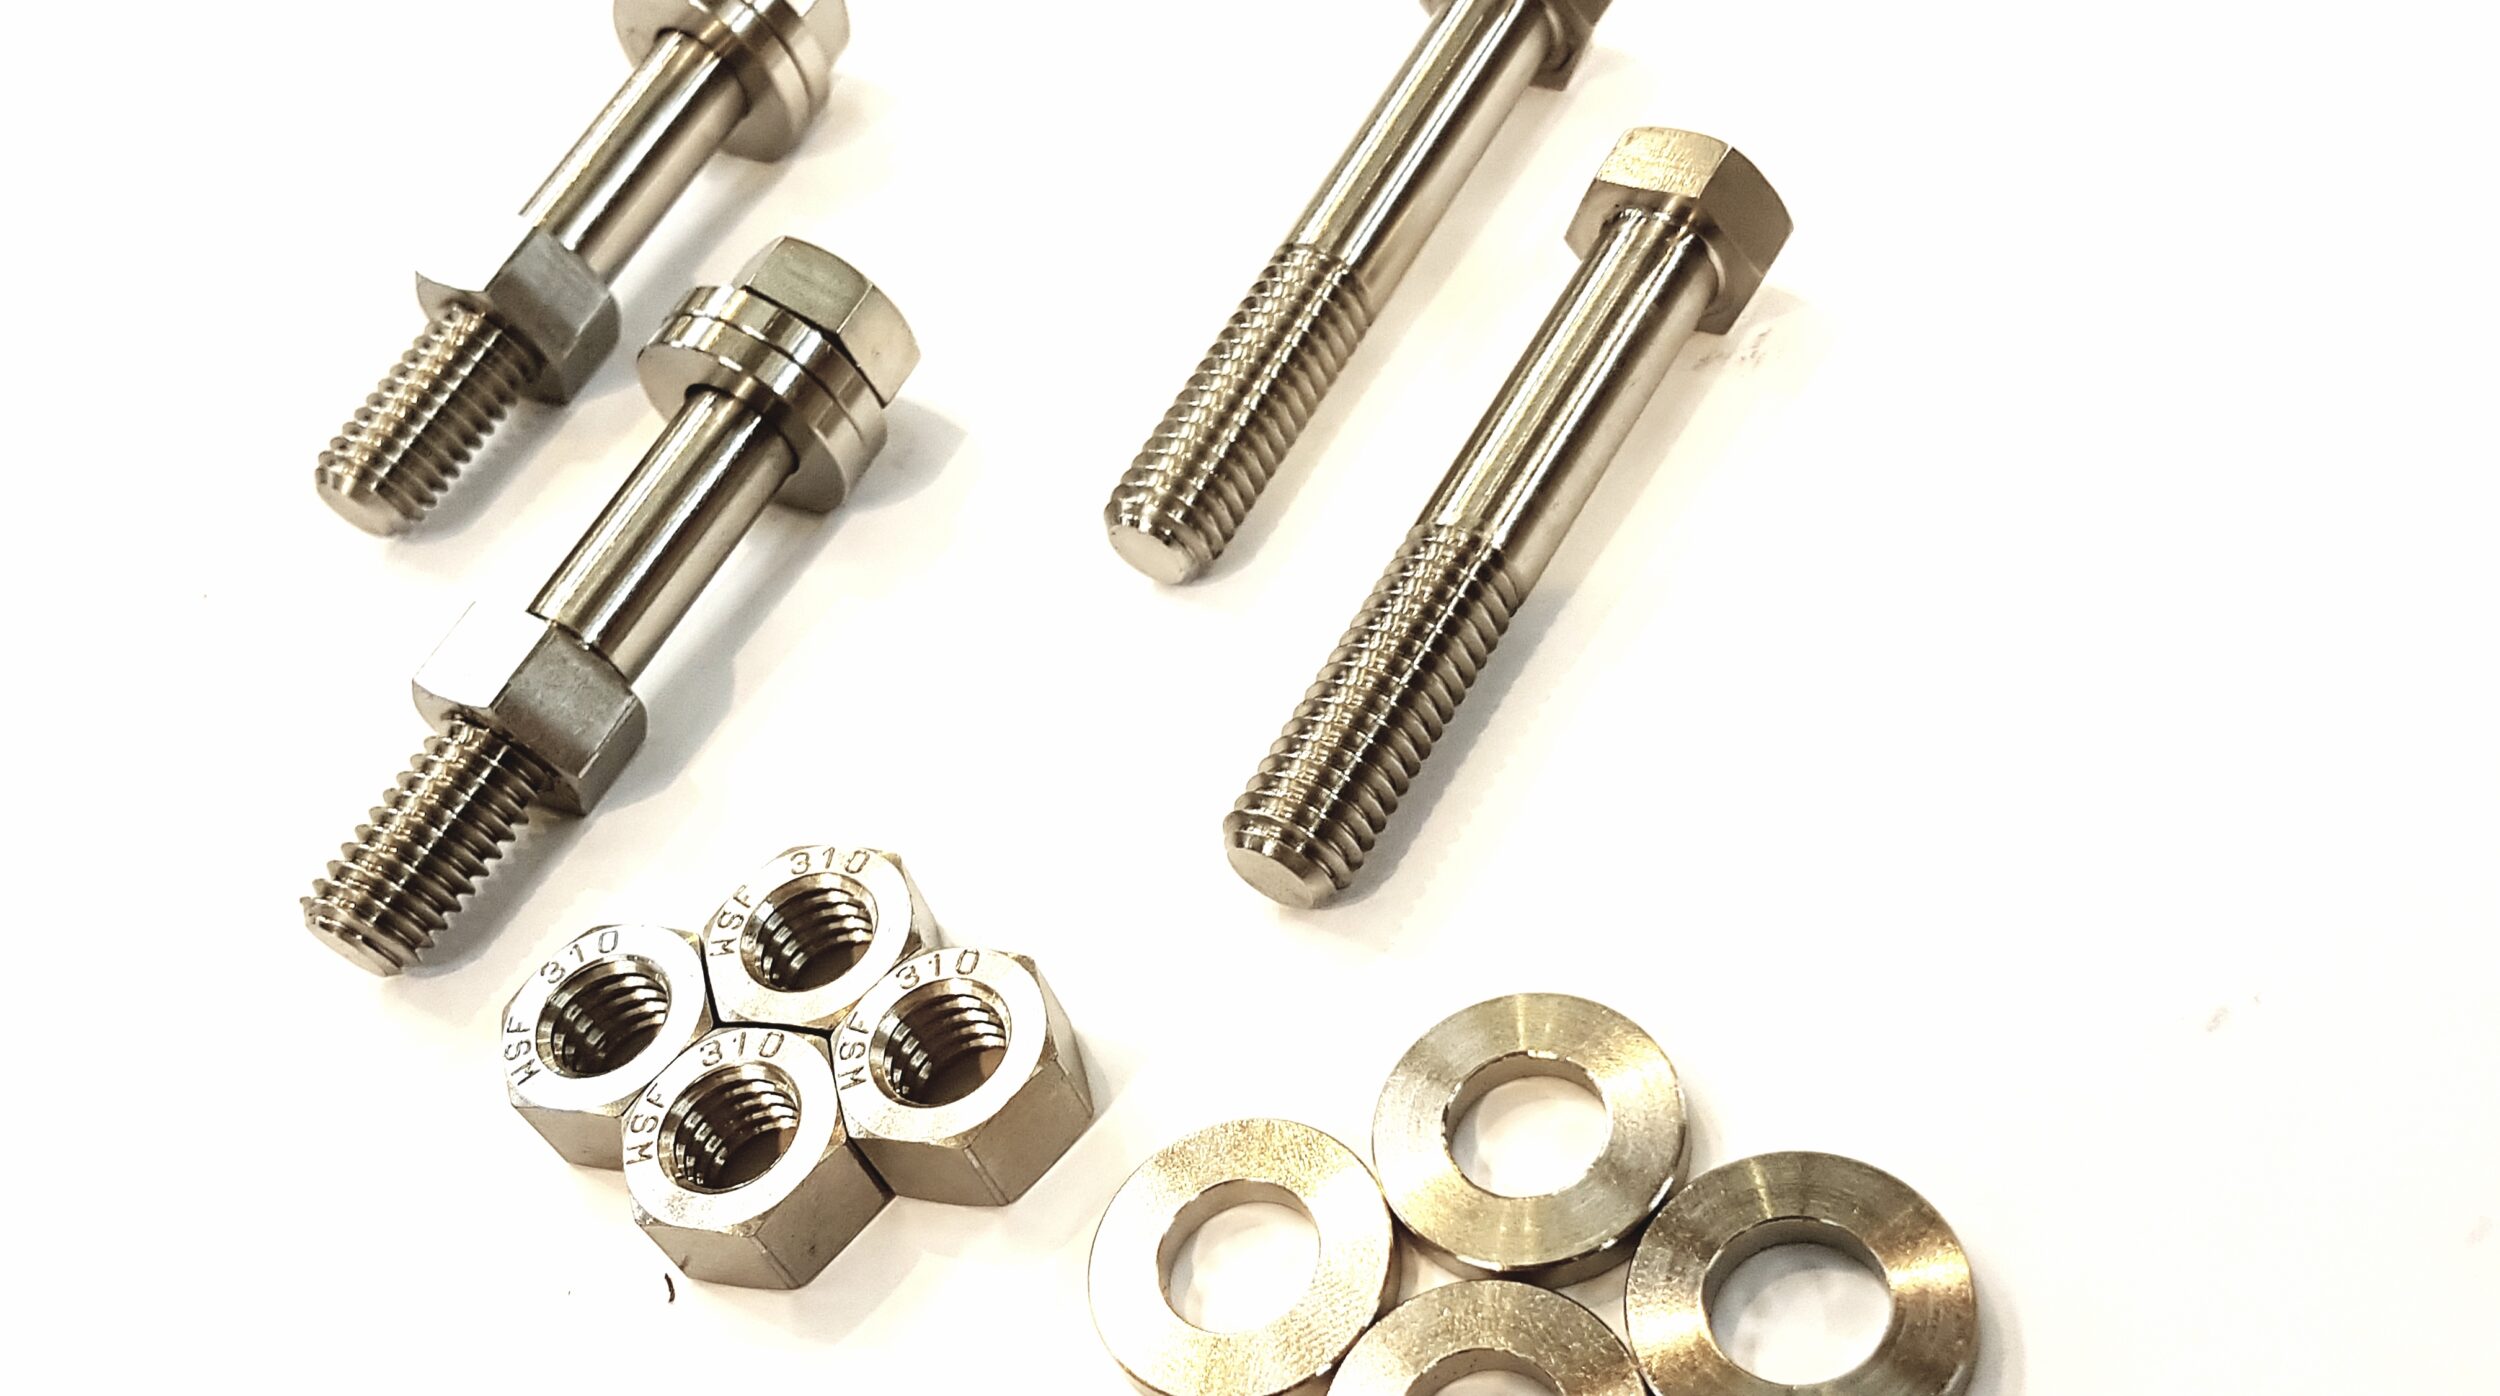 Wulfrun High Criticality Fasteners And Stainless Steel Head Bolts